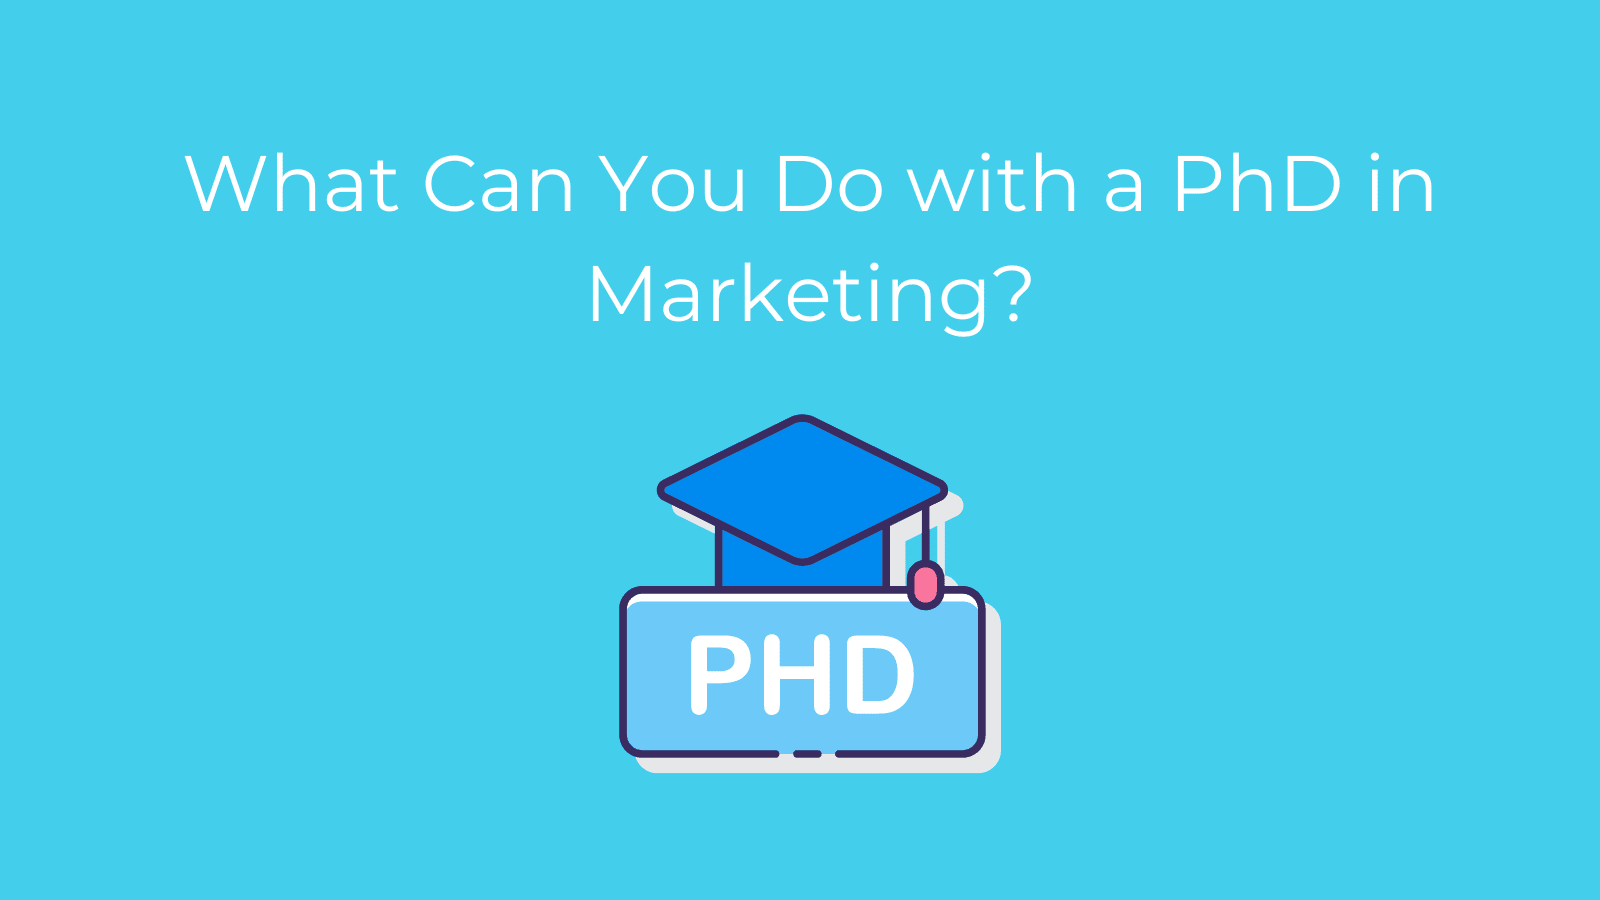 What Can You Do with a PhD in Marketing?